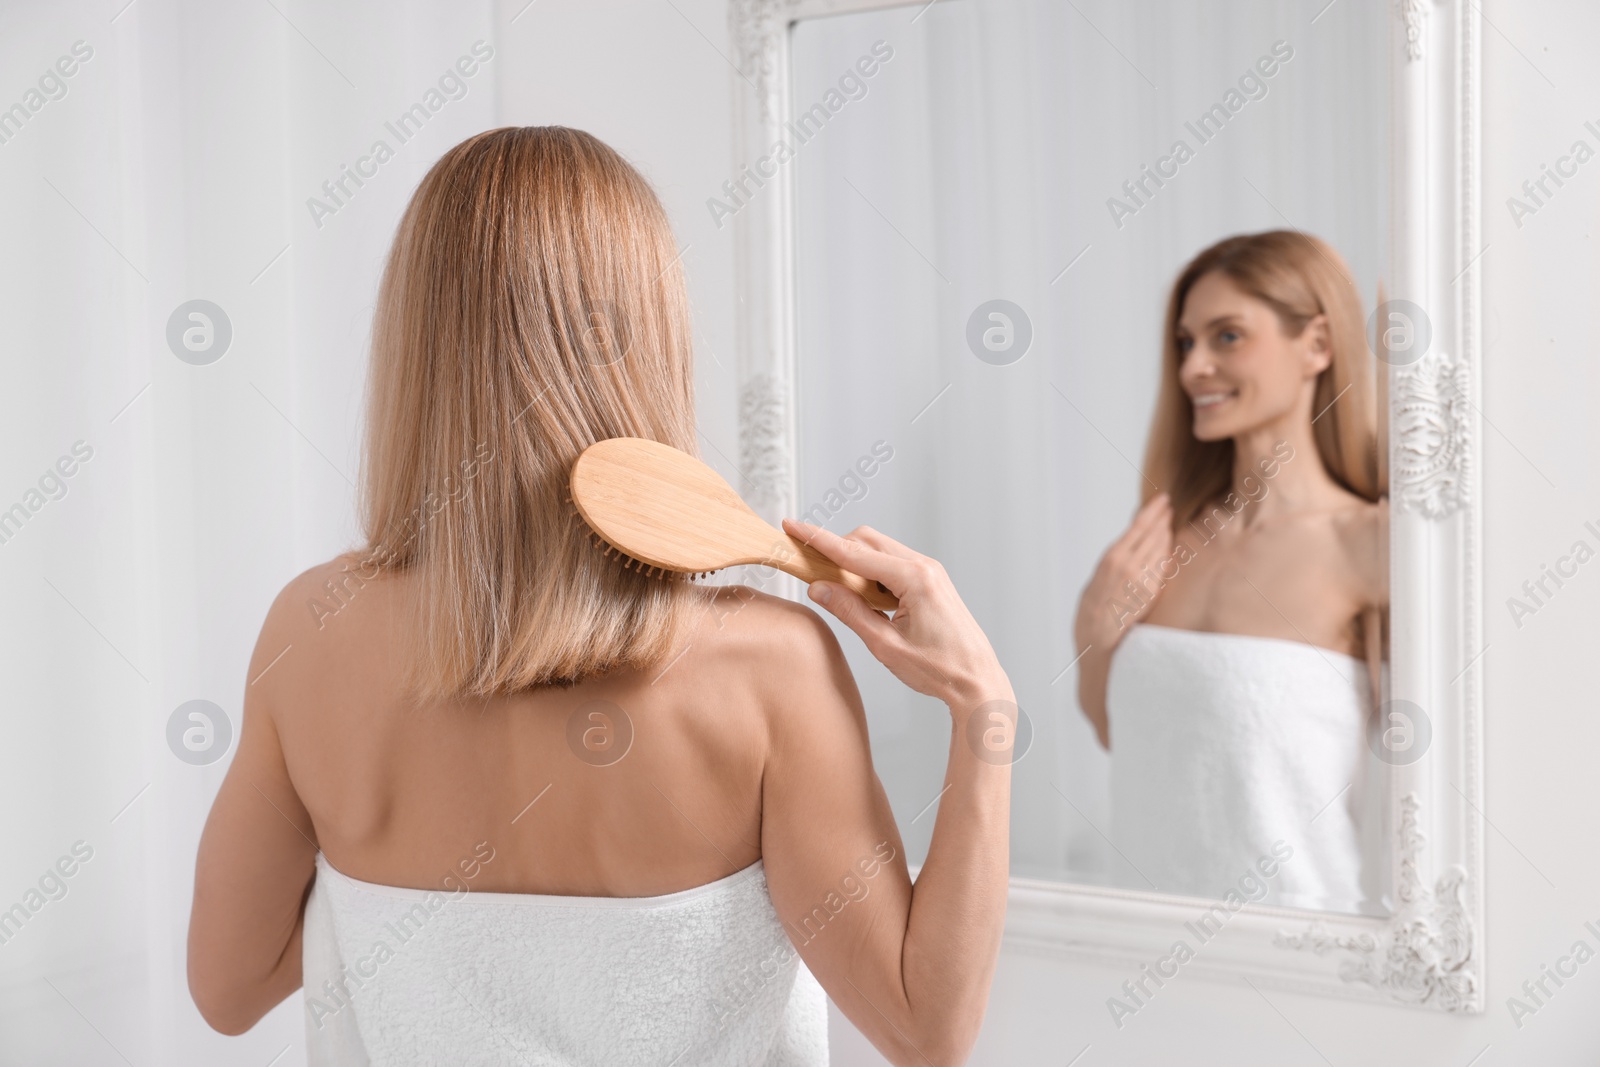 Photo of Woman after shower brushing her hair near mirror in room